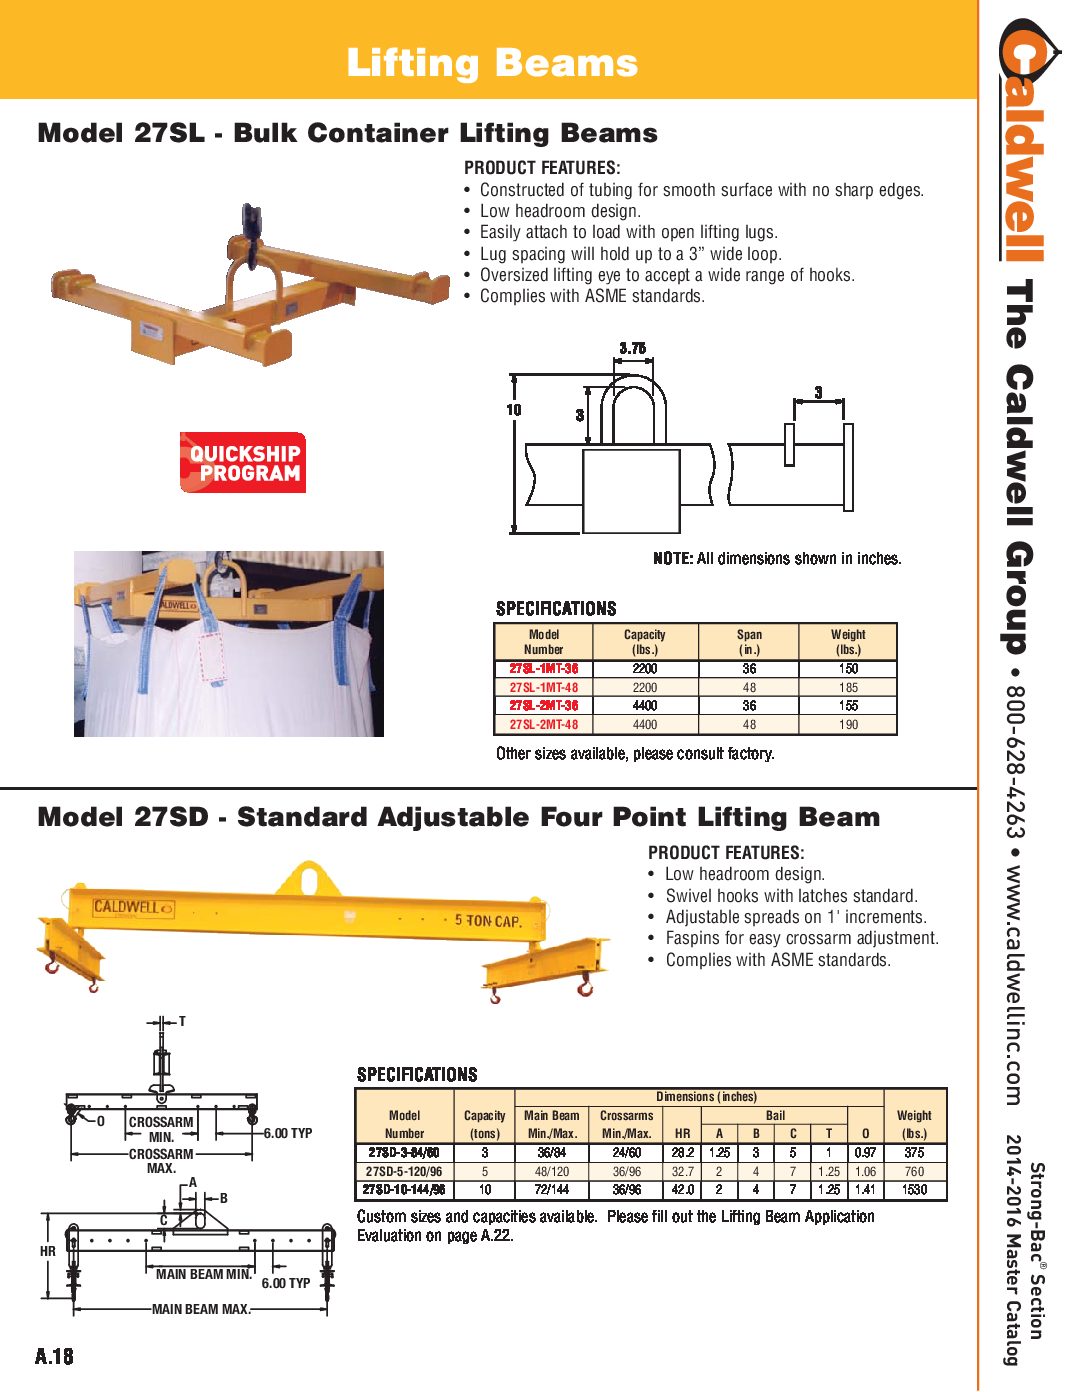 Caldwell STRONG BAC Bulk Container Lifting Beam Spread Sheet pdf